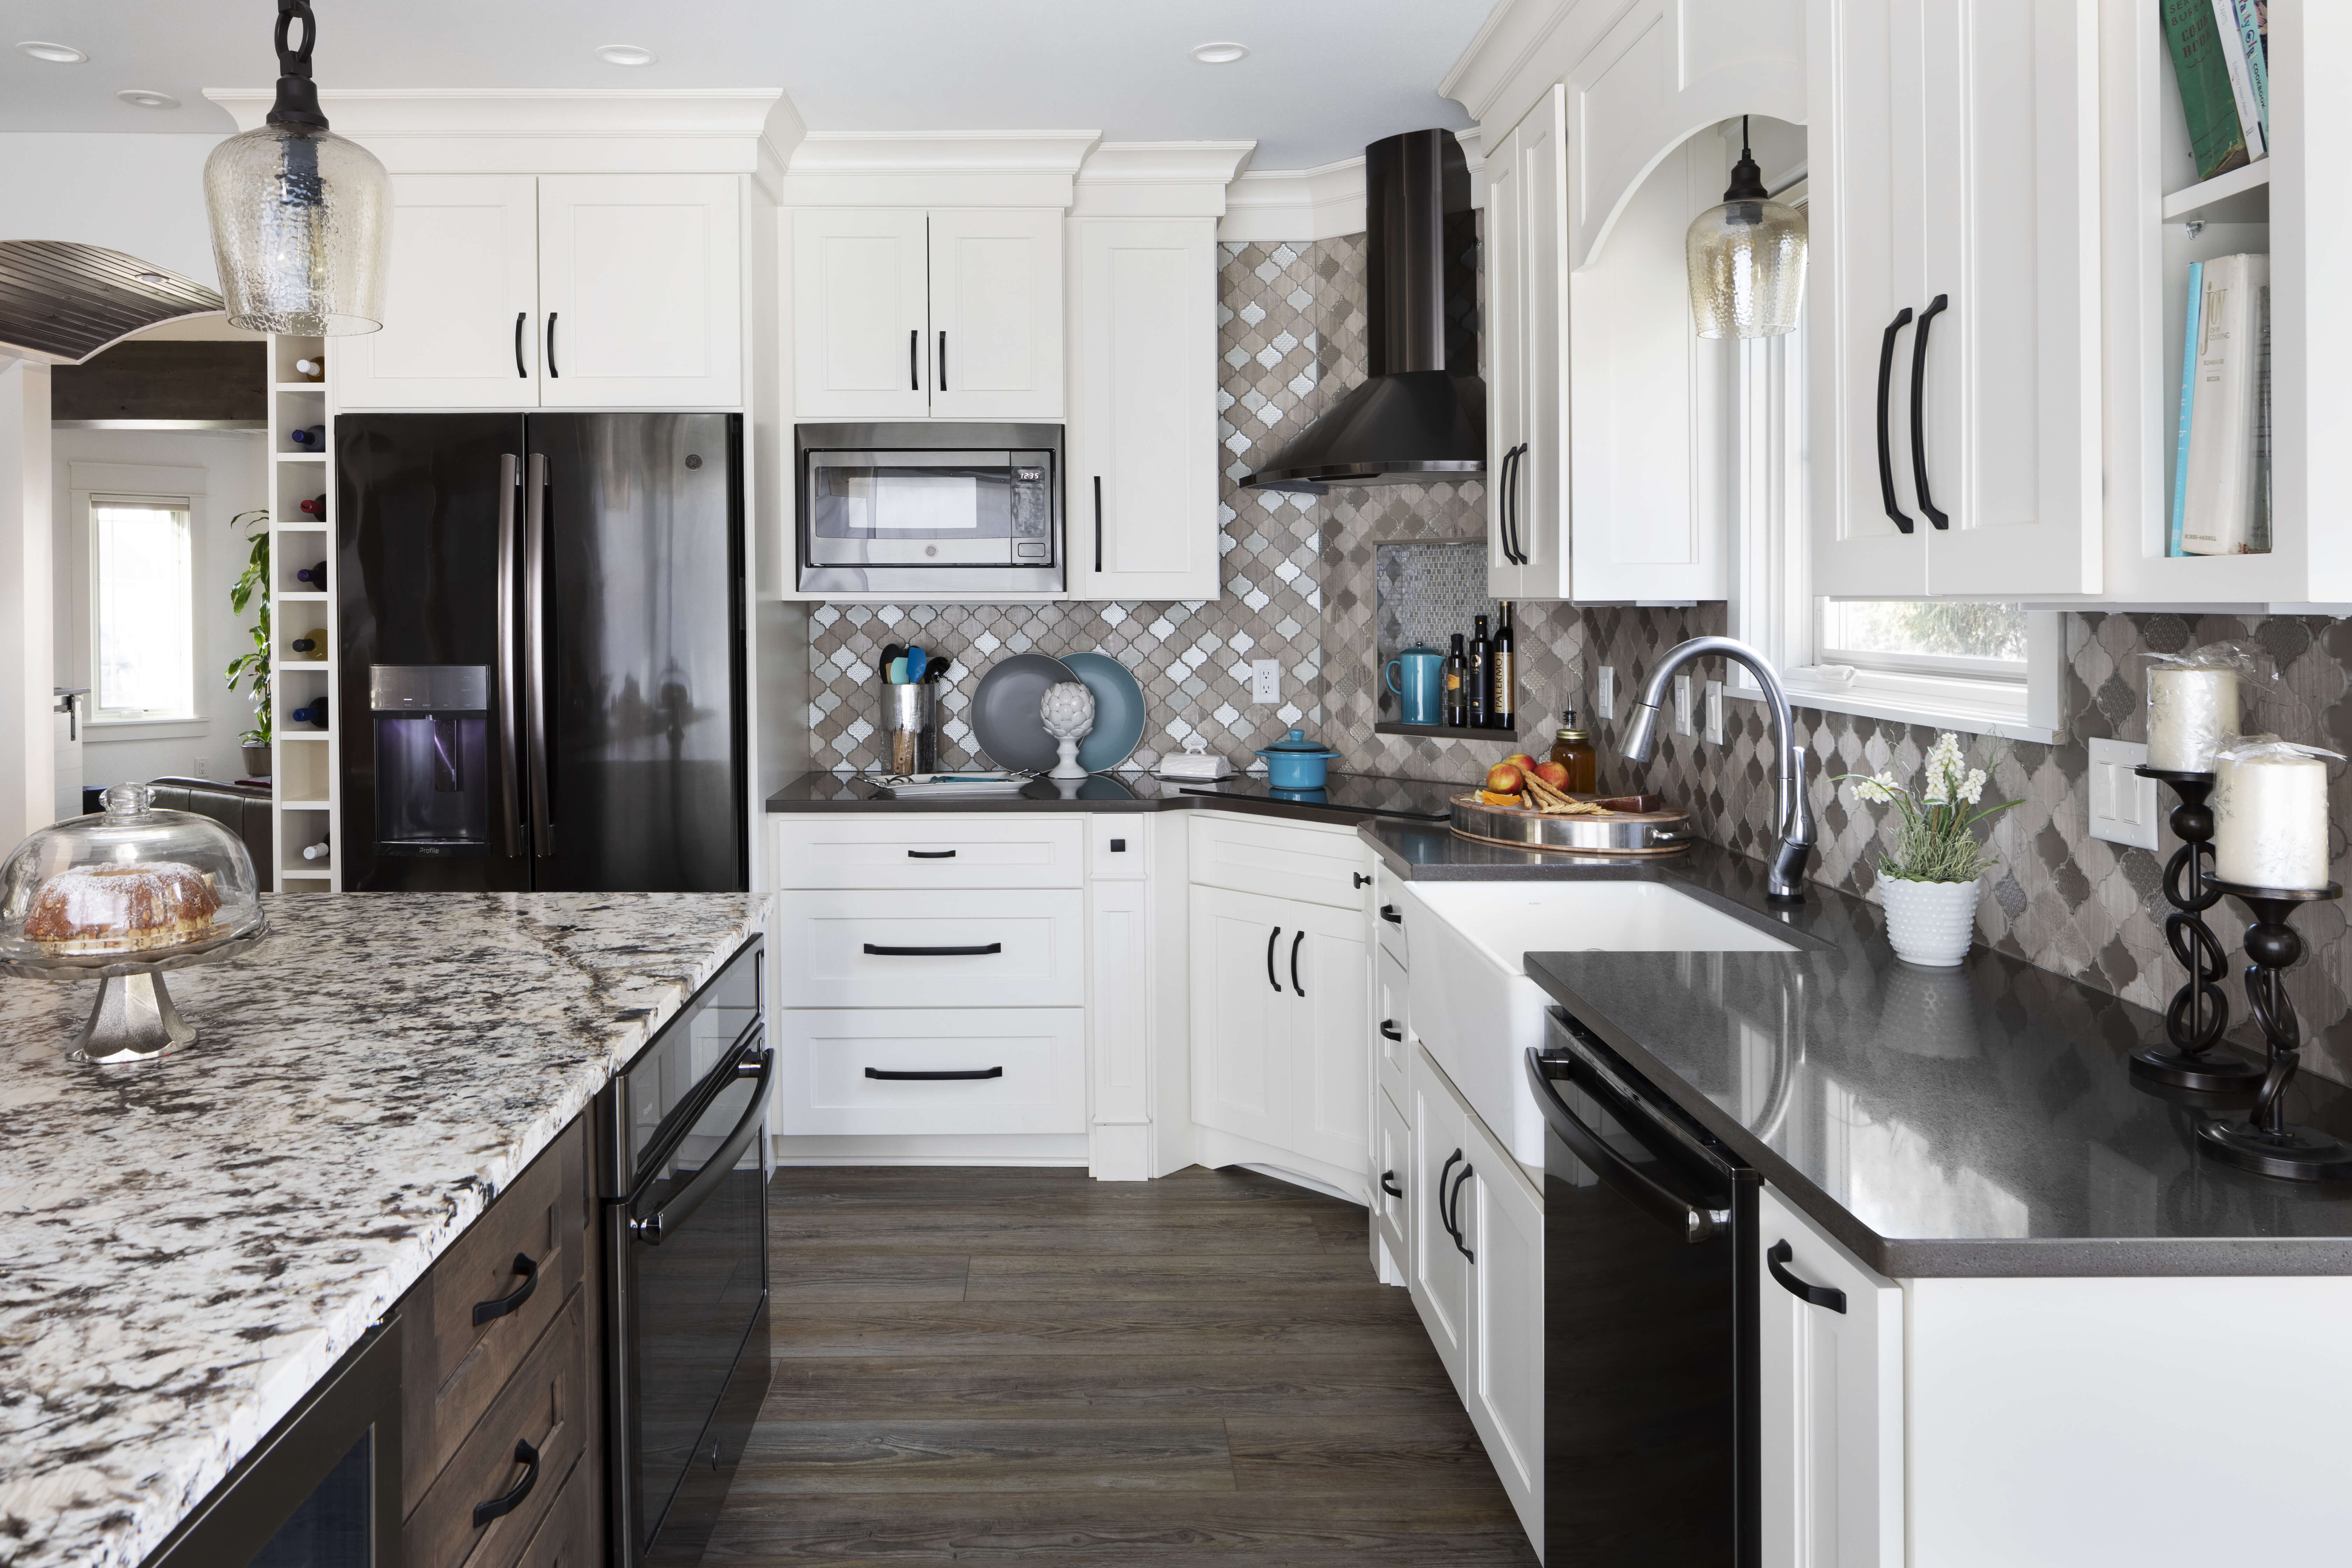 A kitchen remodel with a combination of white painted cabinets and a gray stained kitchen island featuring black countertops and black staineless steel appliances.